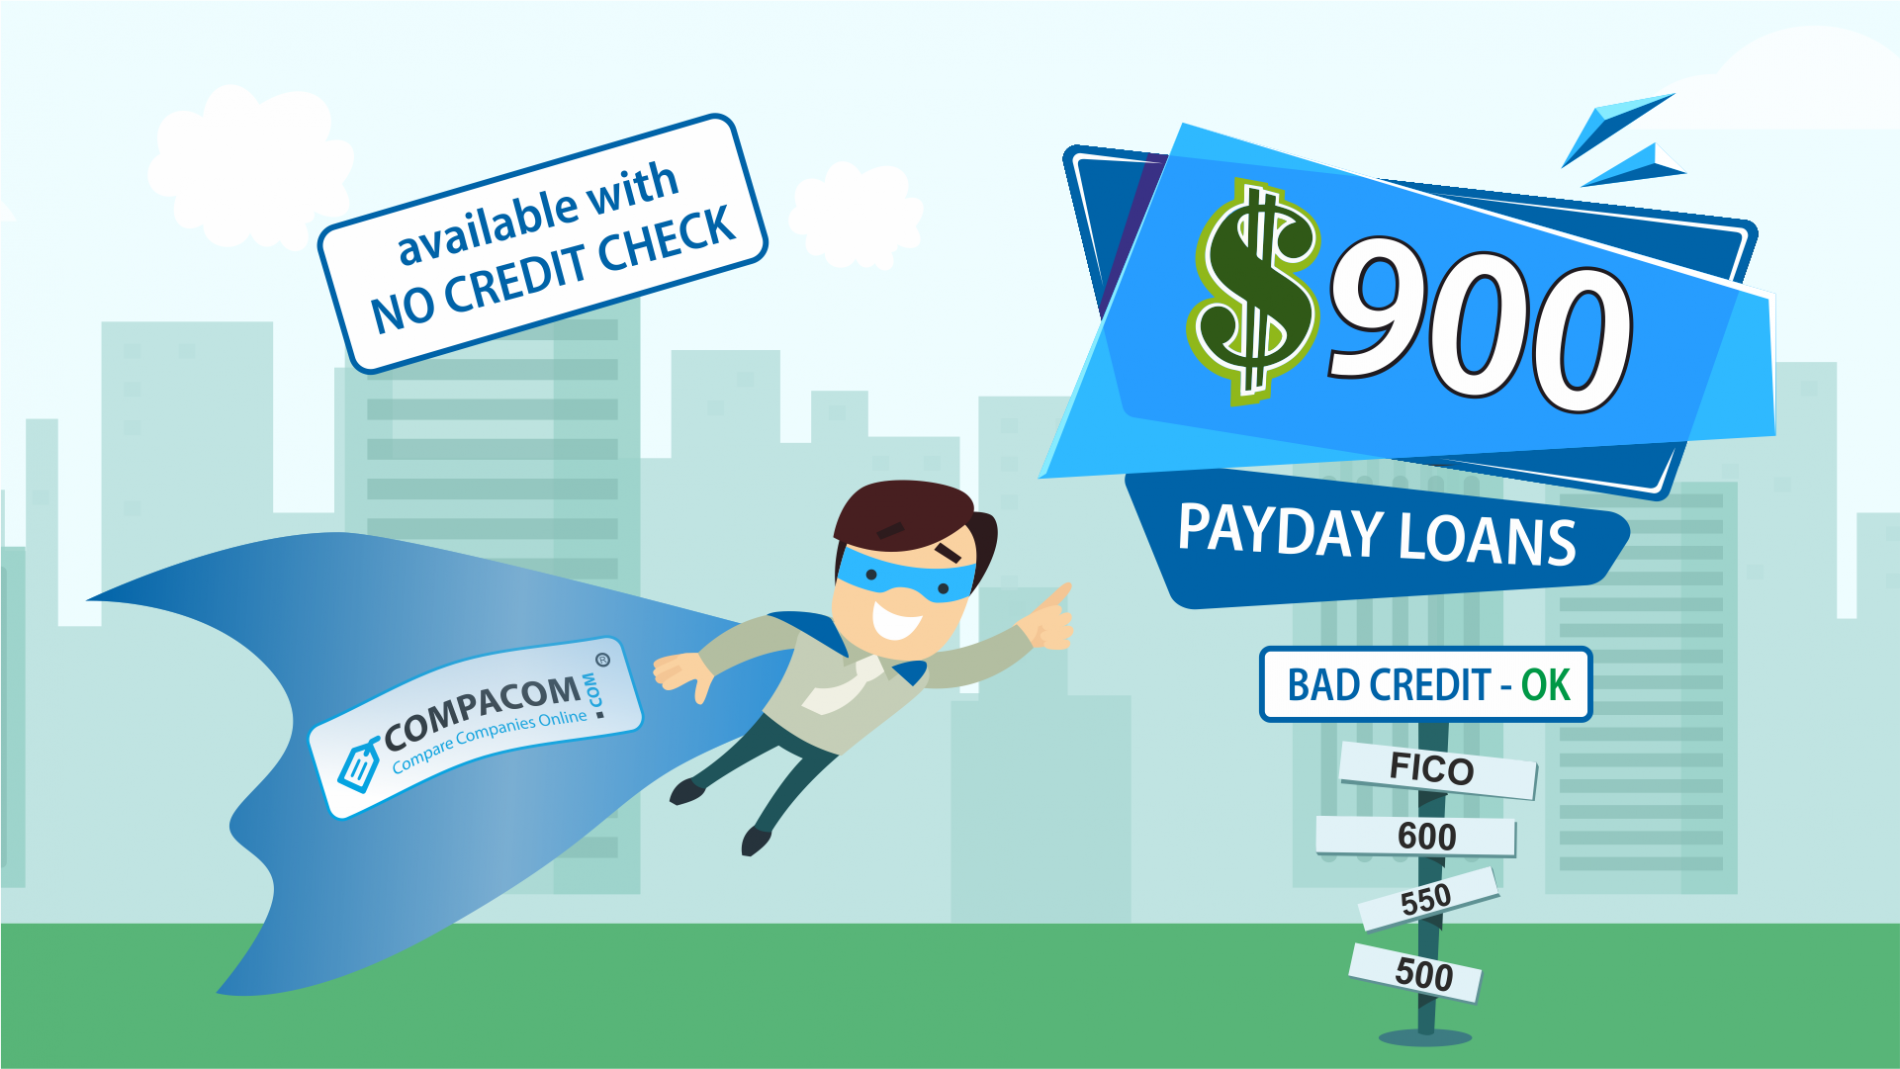 900 Loan - Get 900$ Payday Loan for Bad Credit | COMPACOM ...